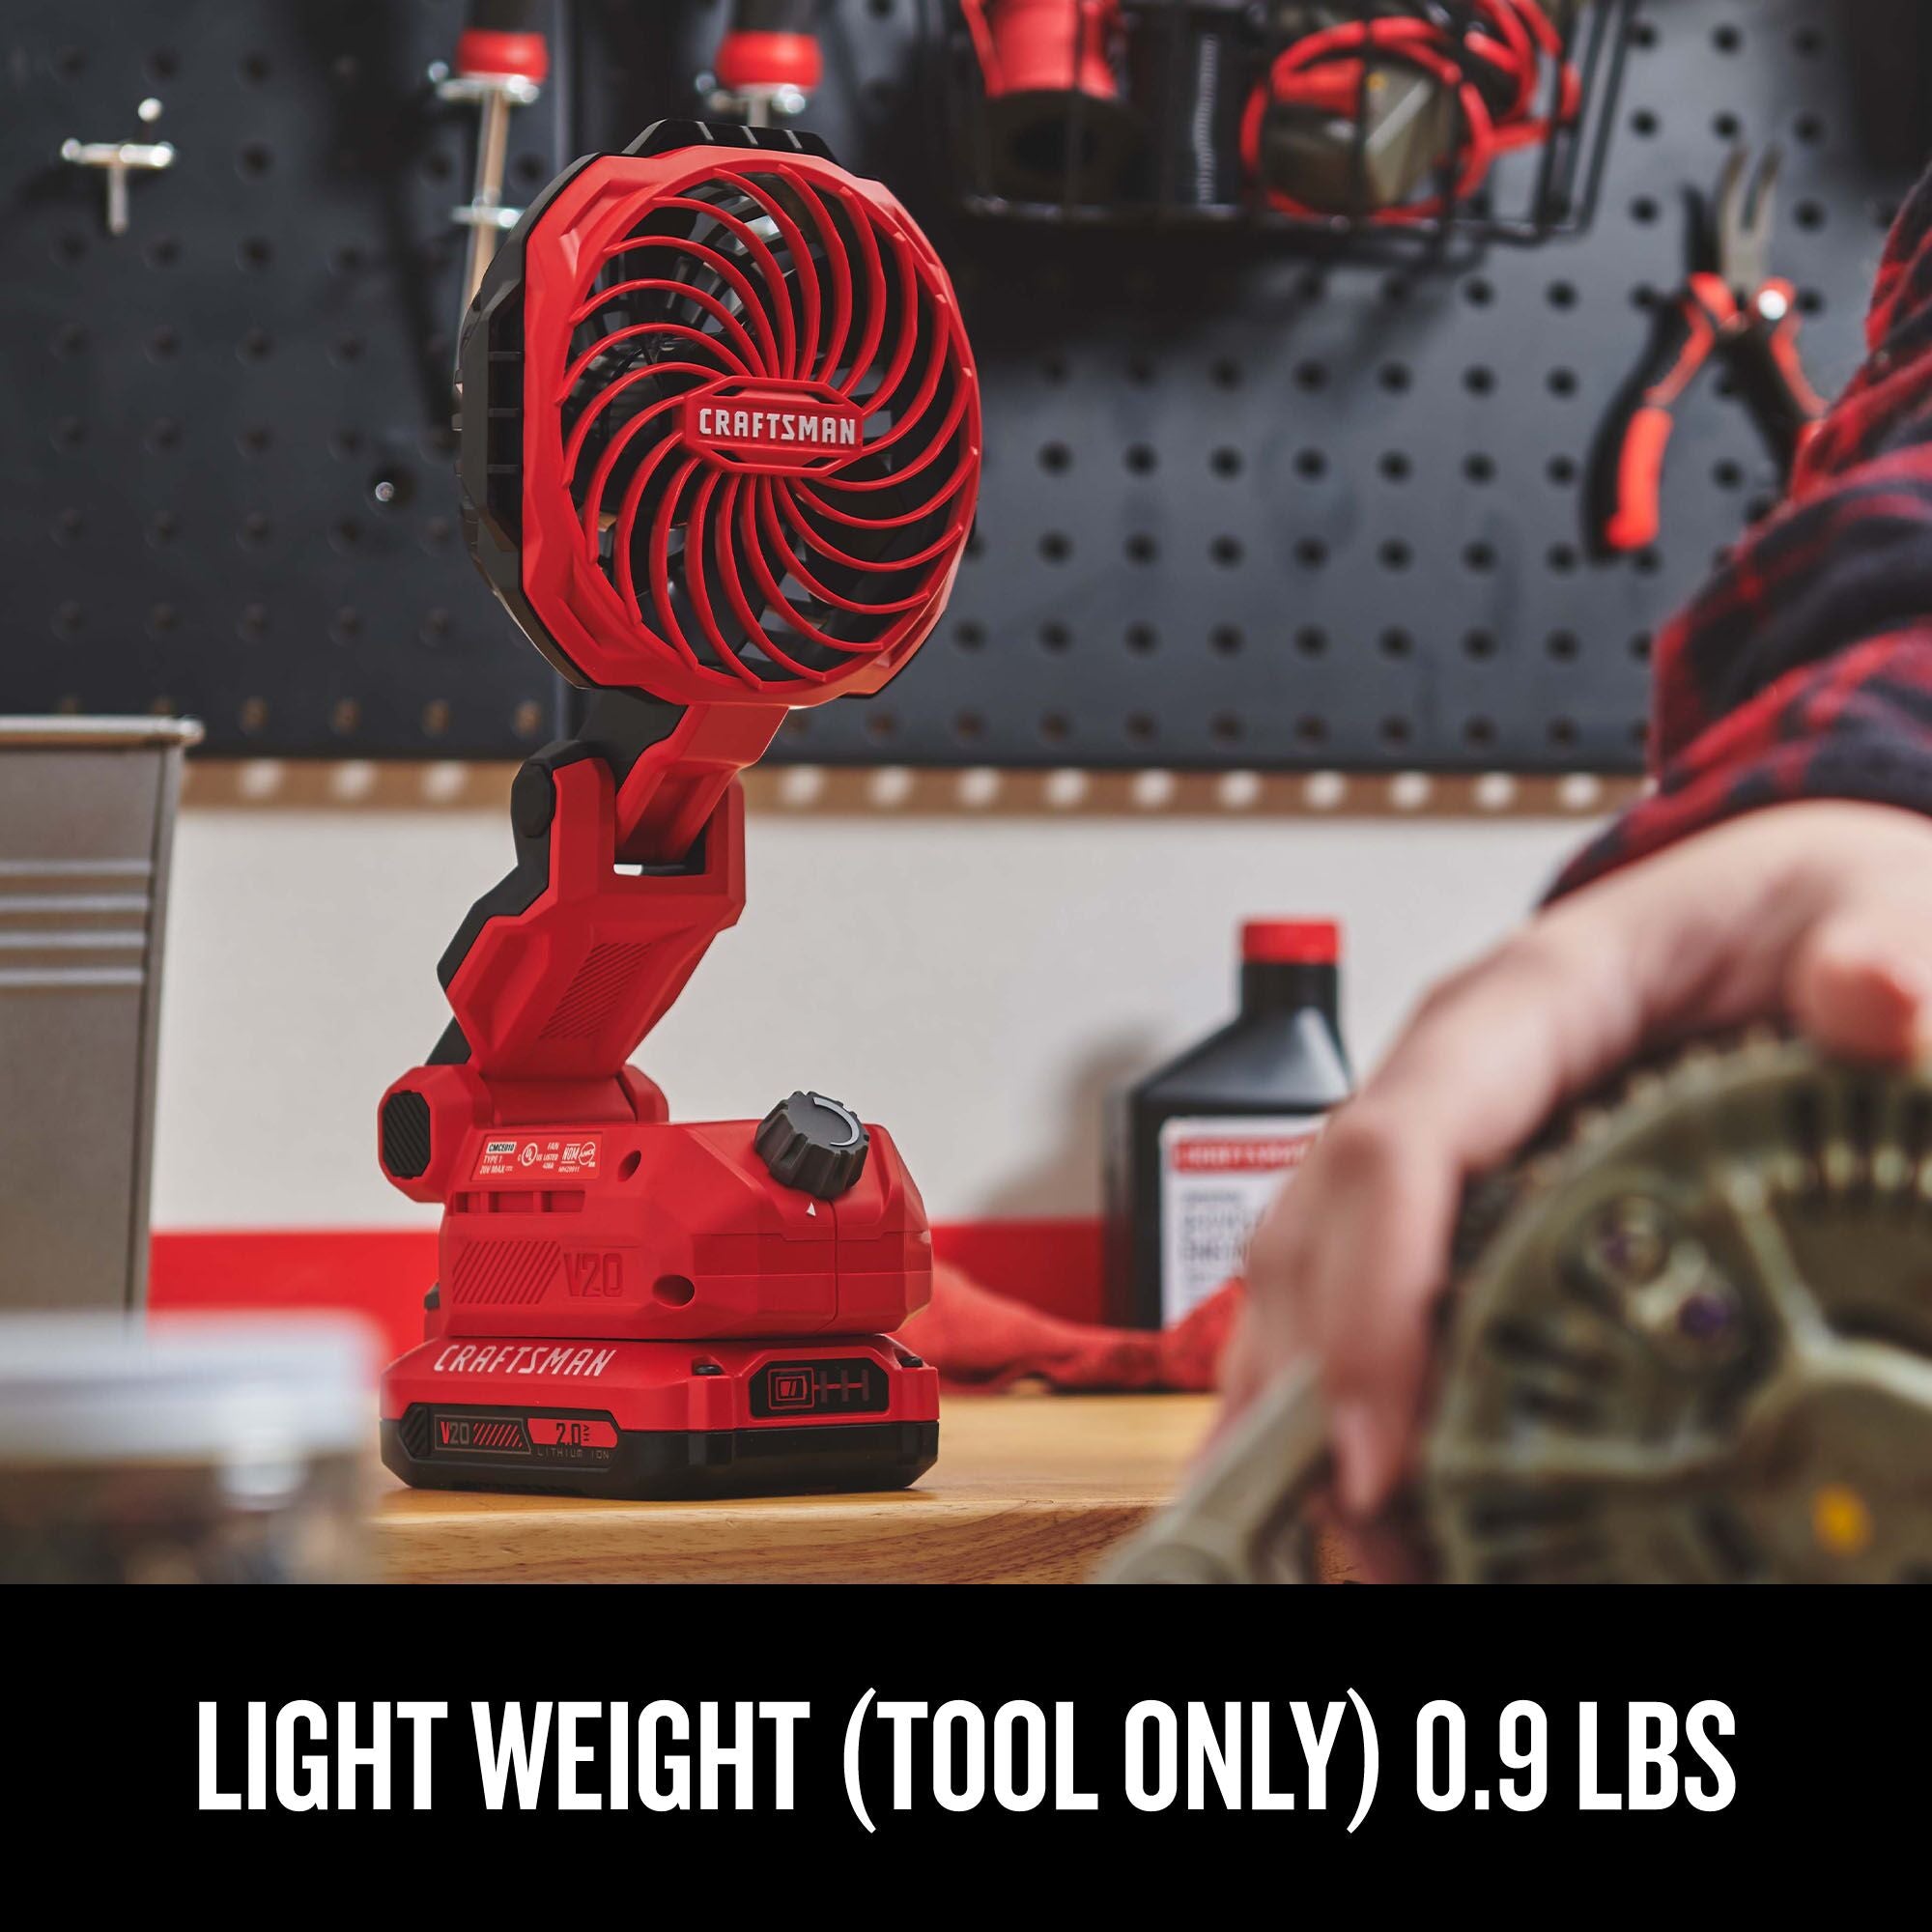 CRAFTSMAN(R) V20 Compact Personal Fan sitting on a work bench, highlighting light weight at 0.9lbs (tool only)